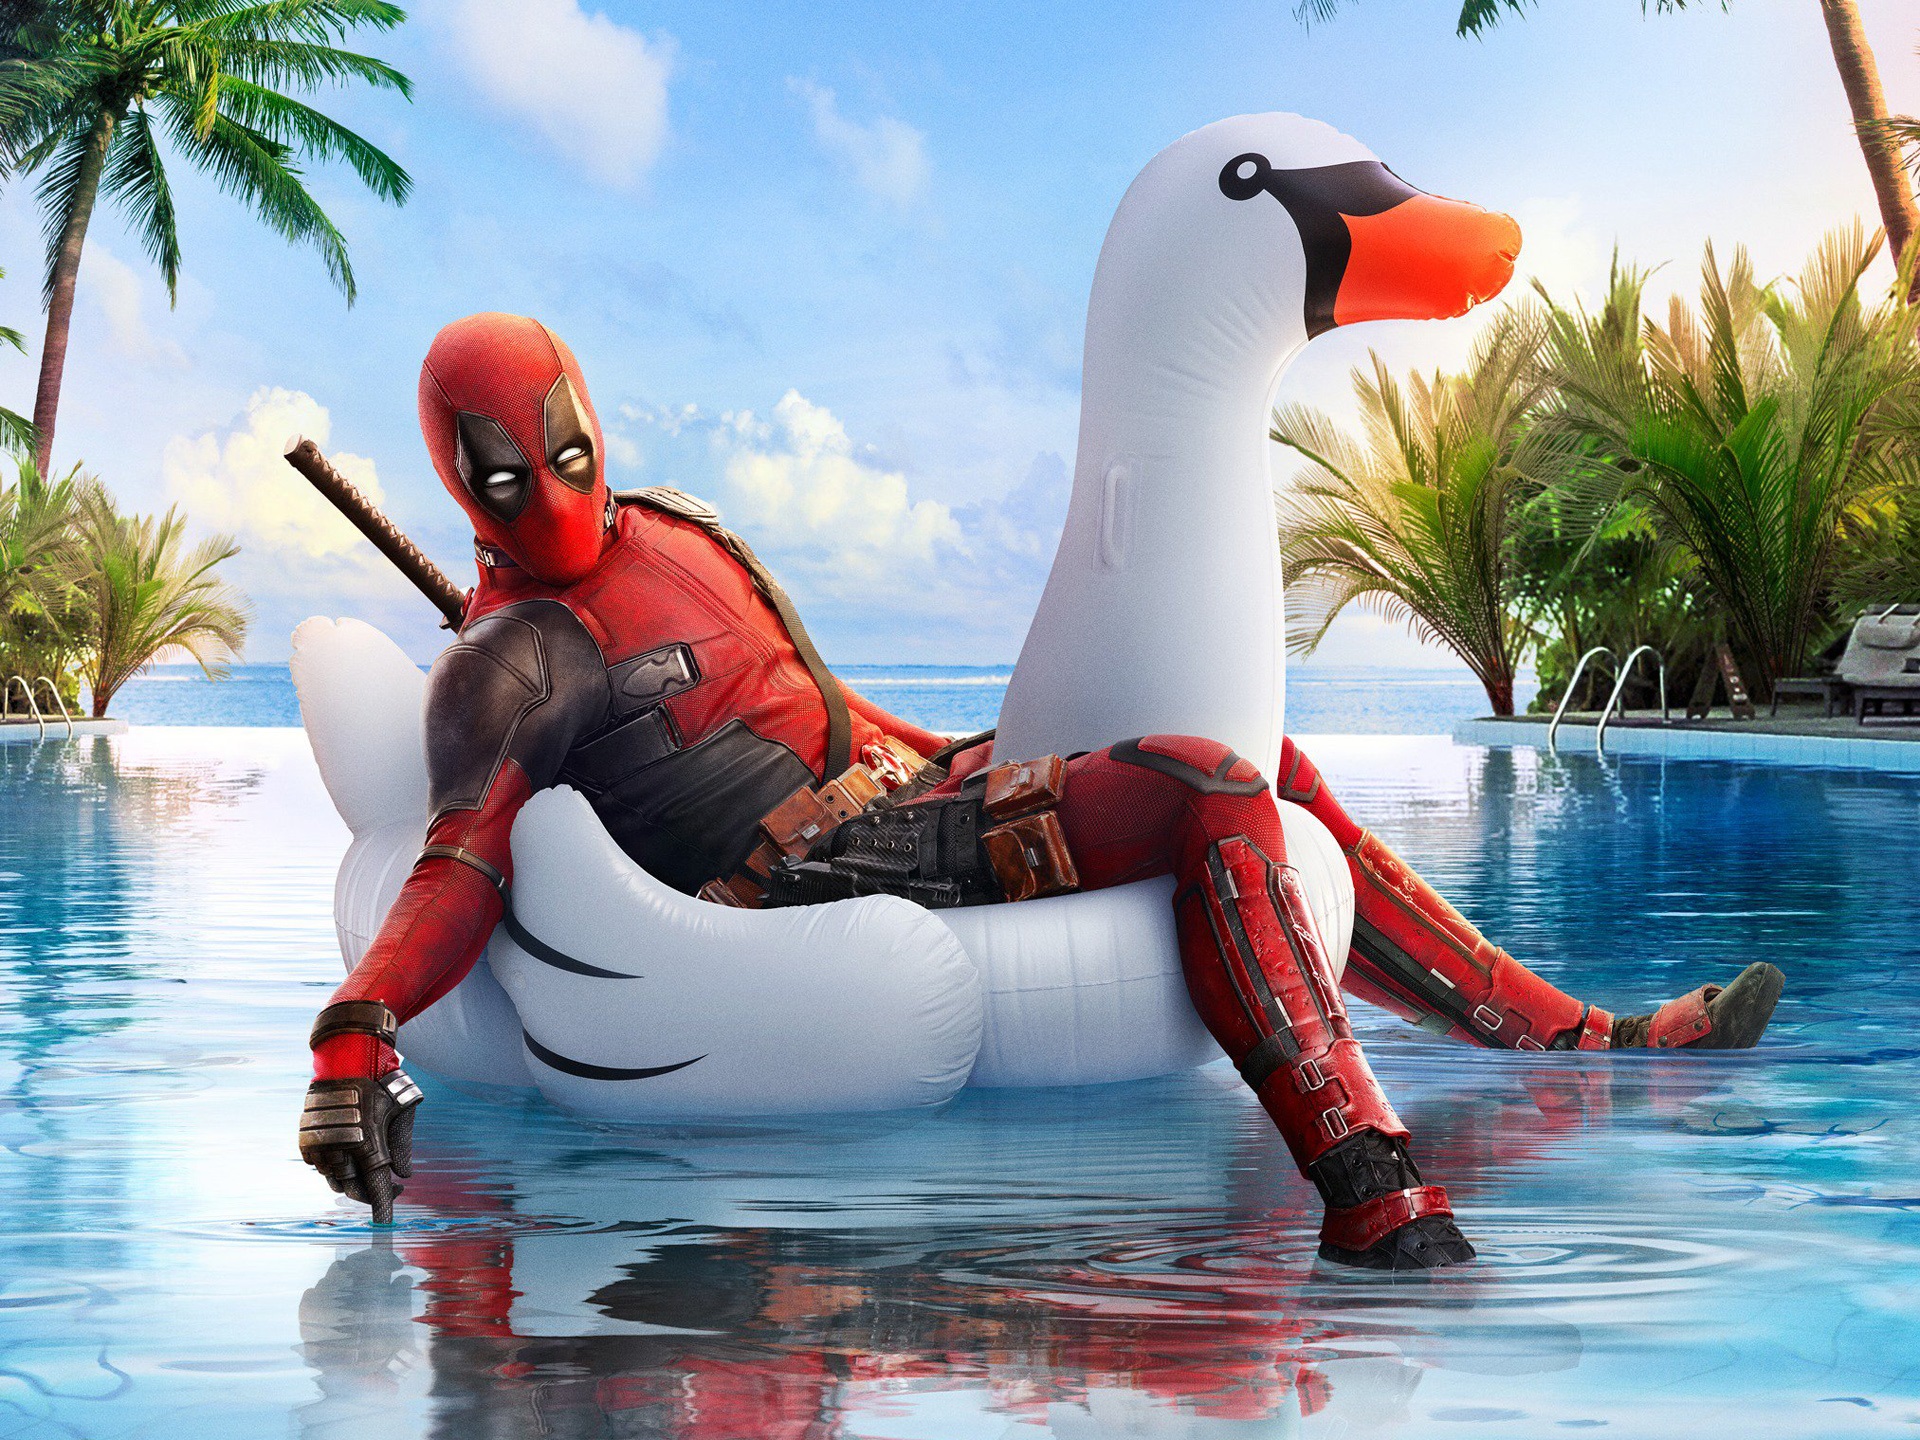 Download This Wallpaper - Deadpool In Pool , HD Wallpaper & Backgrounds